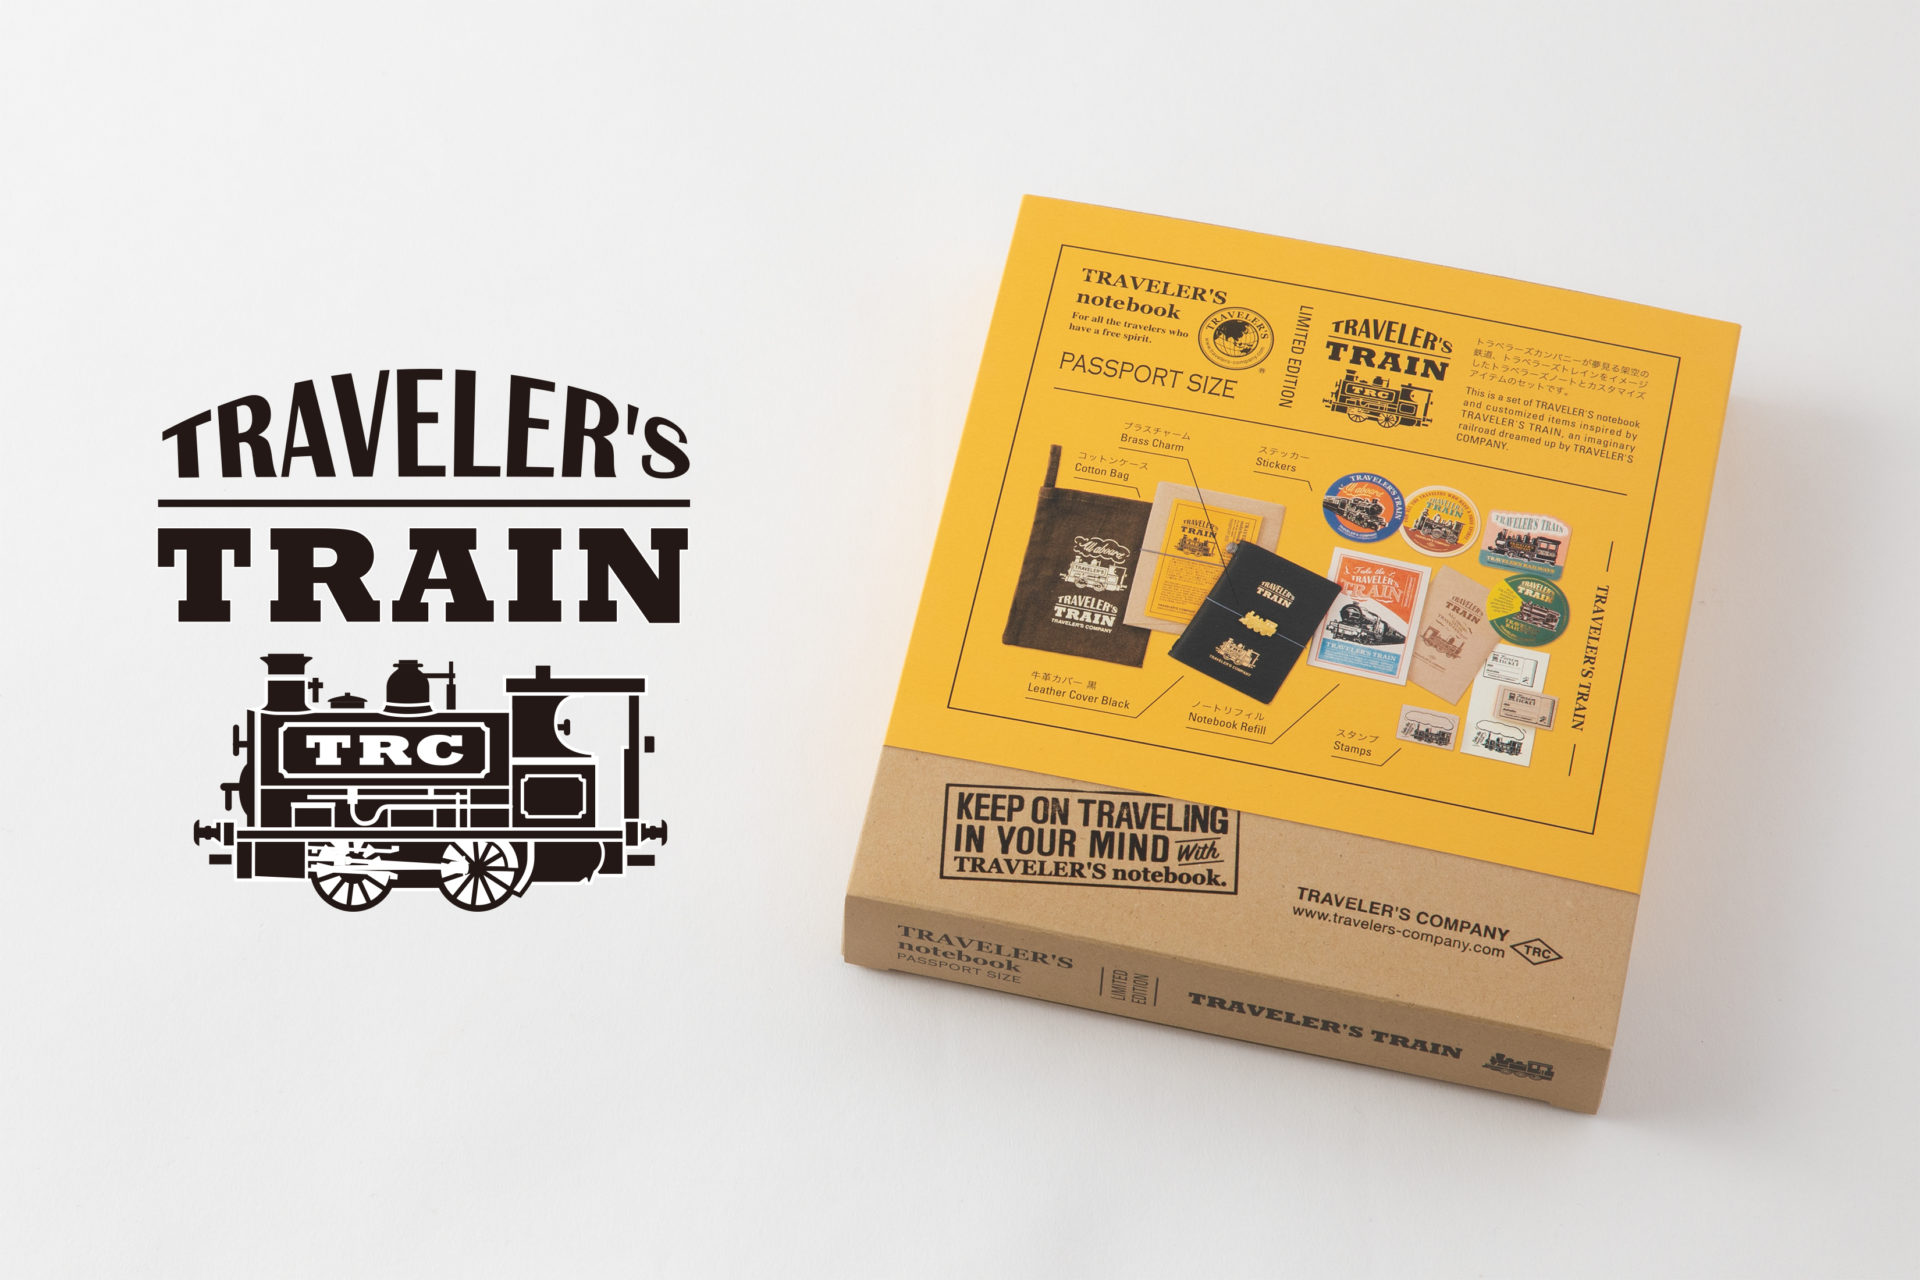 Travel Journal (Limited Product)